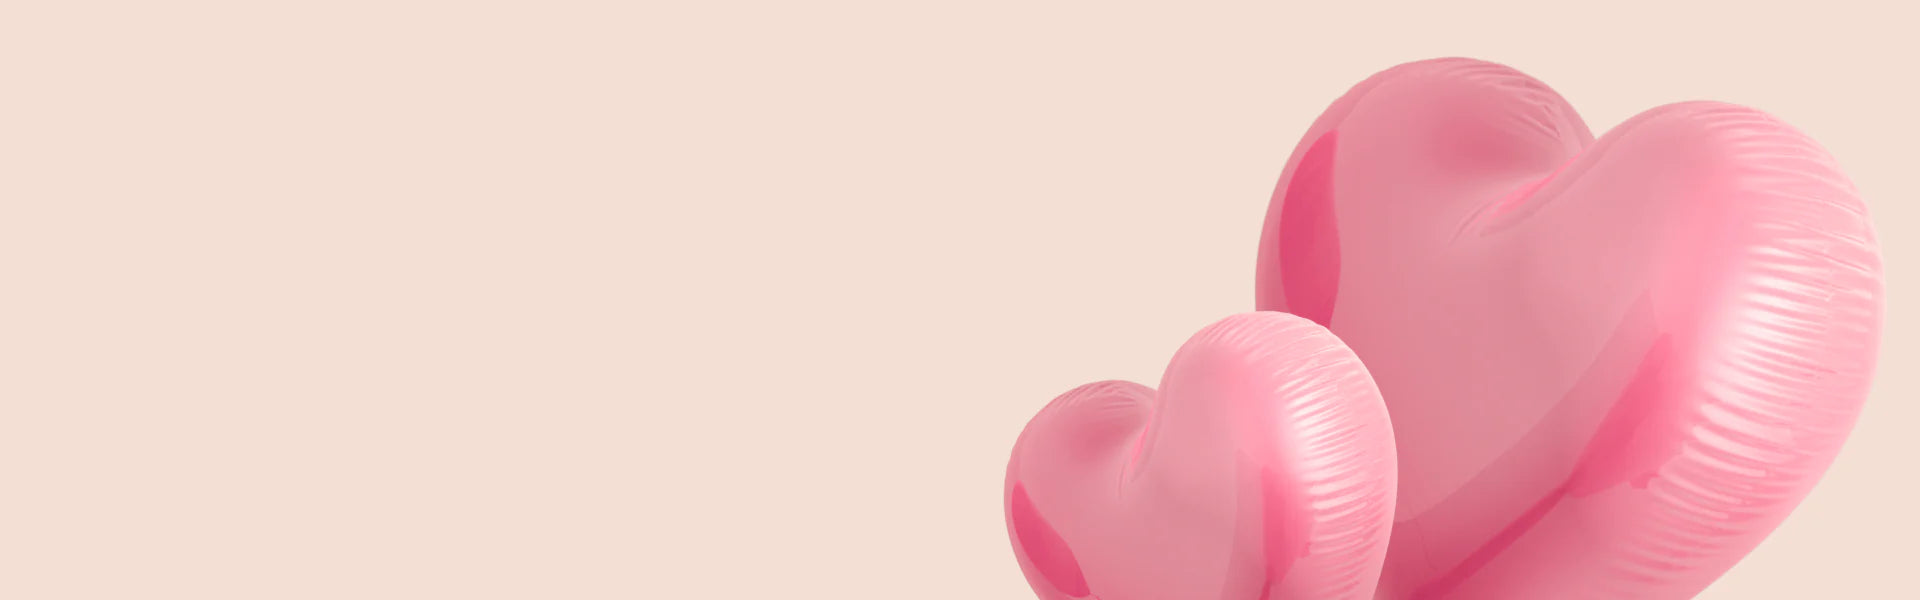 A pink balloon in the shape of a heart.